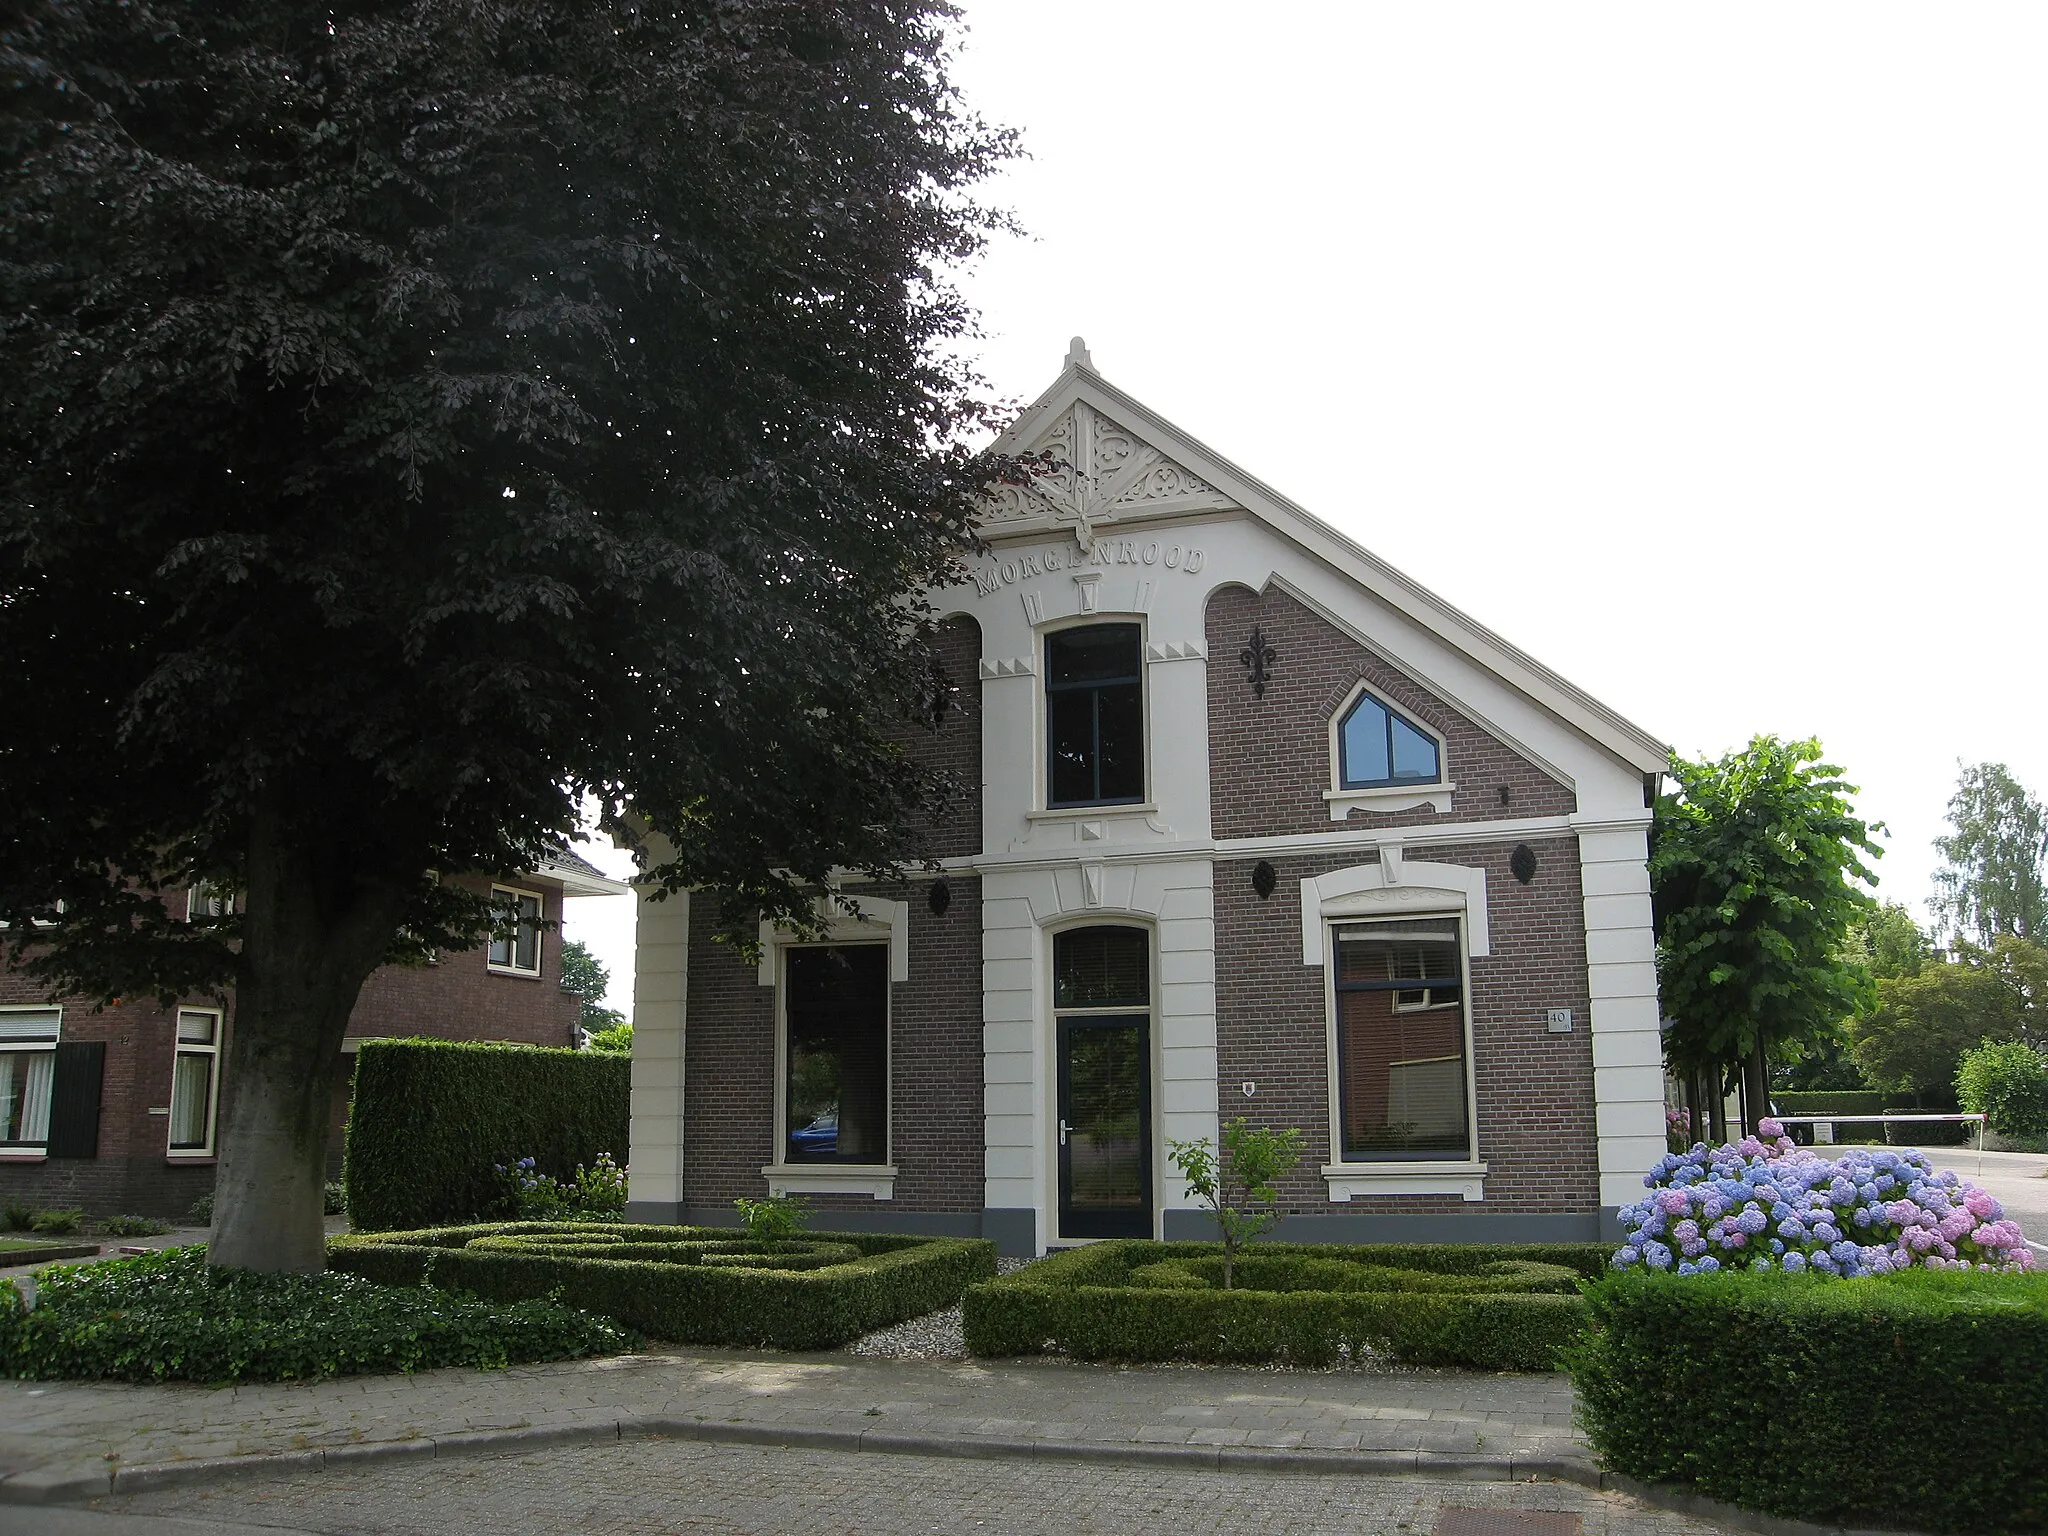 Photo showing: This is an image of a municipal monument in Oude IJsselstreek with number